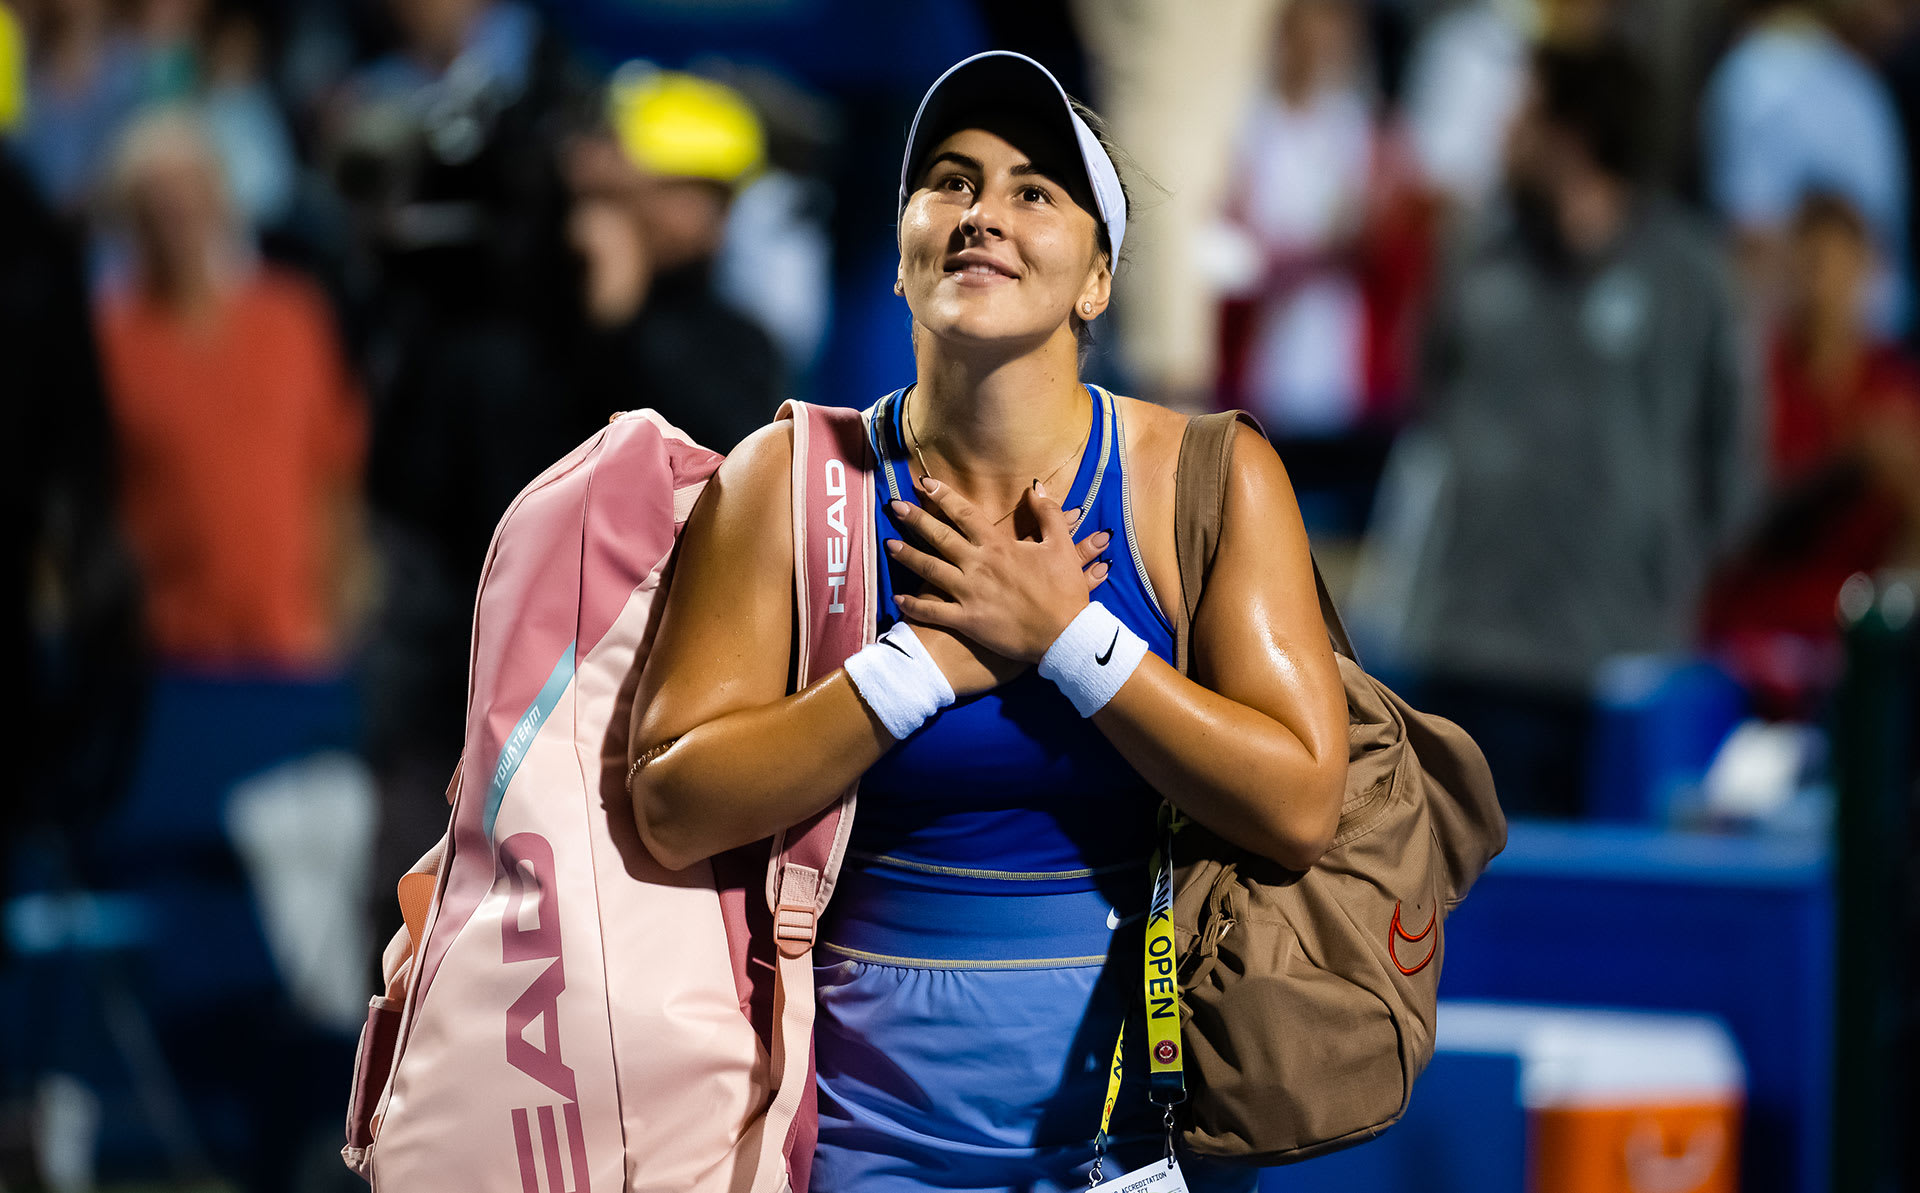 Bianca Andreescu of Canada walks off the court after losing to Qinwen Zheng of China